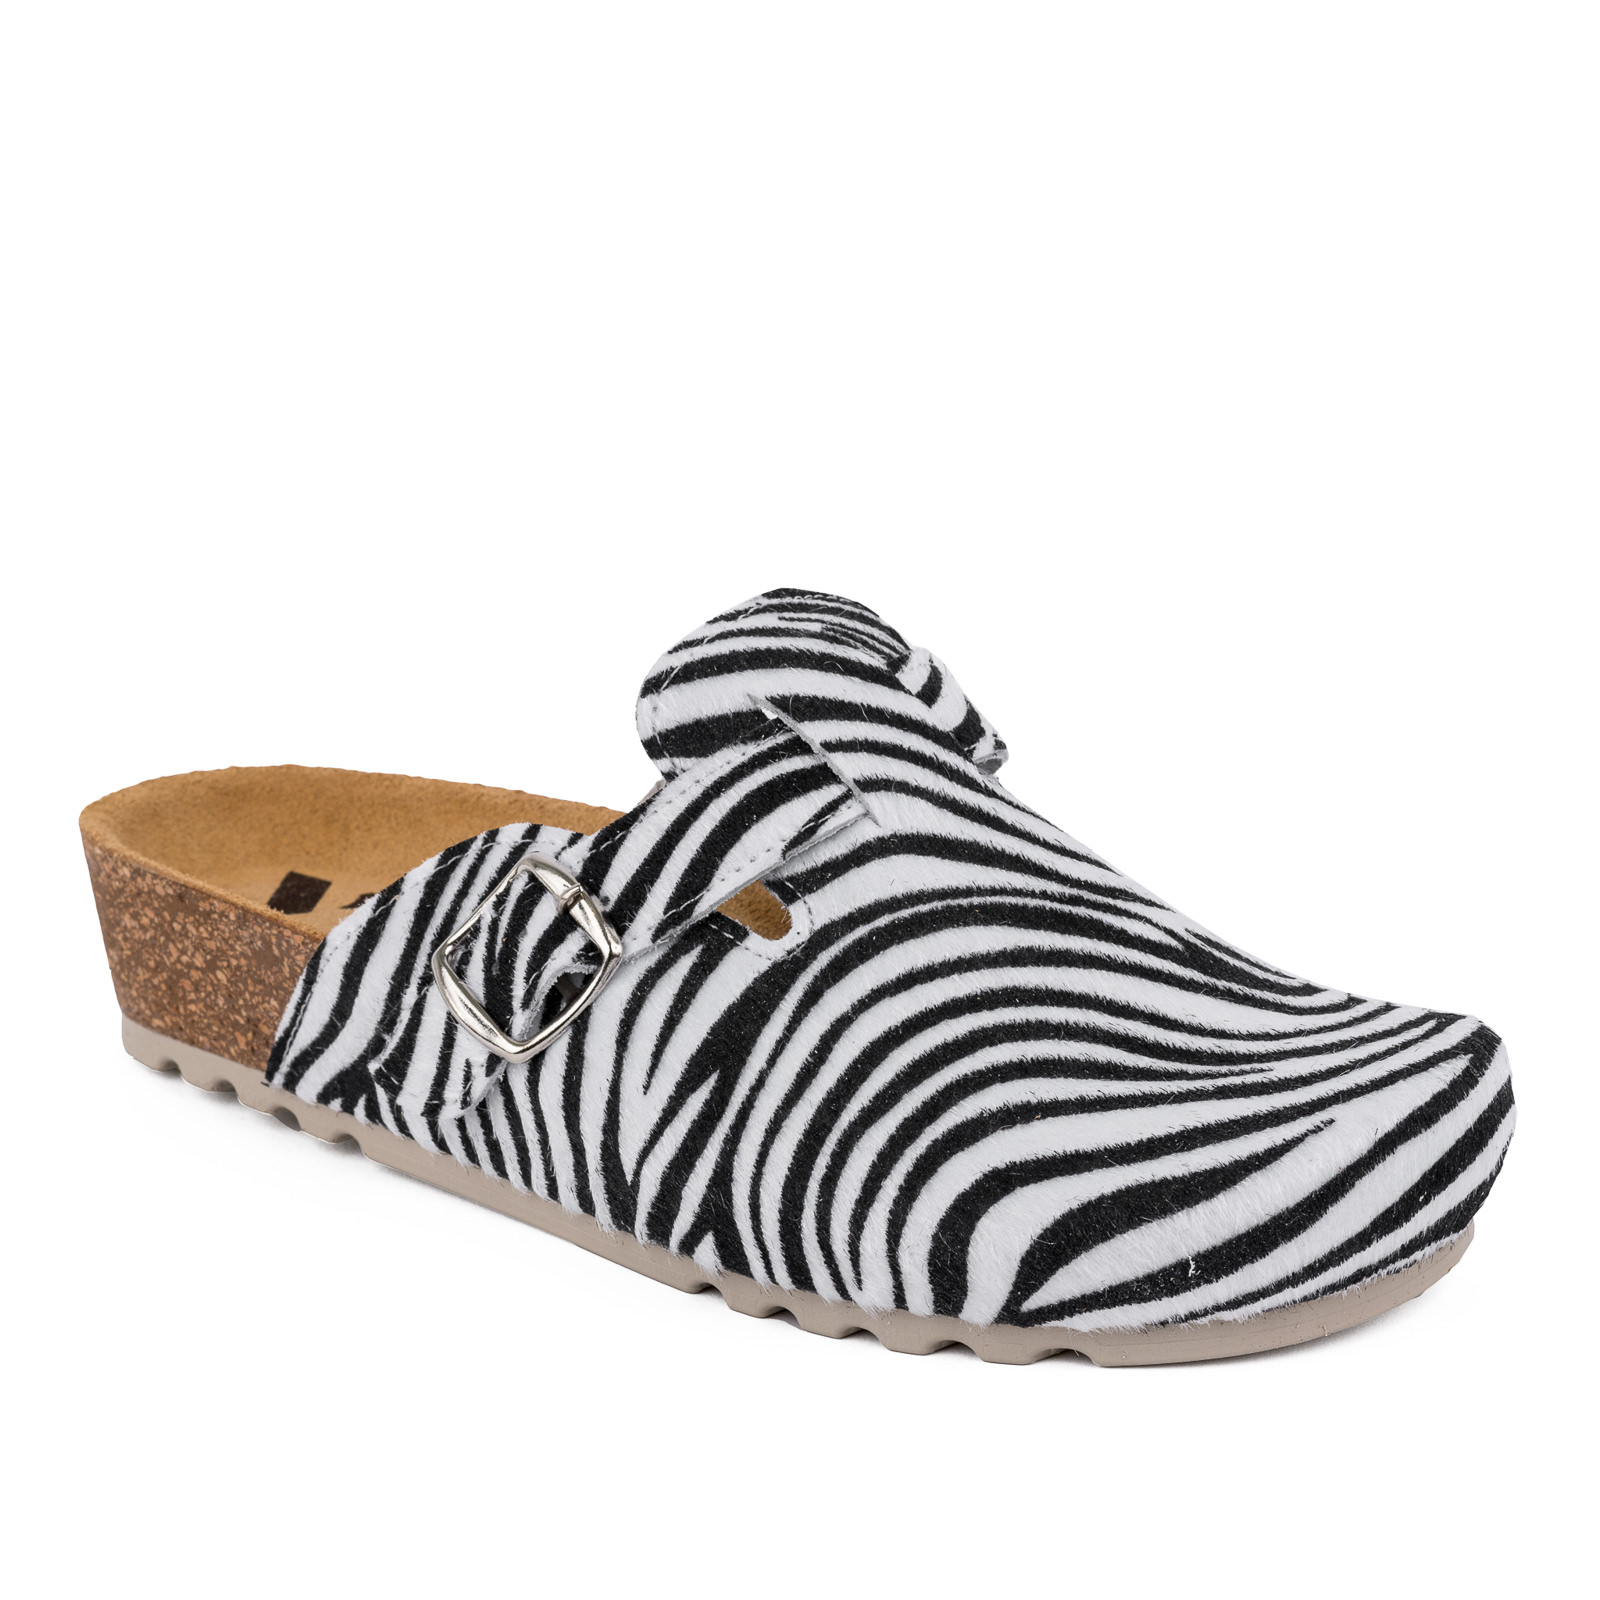 ZEBRA PRINT LEATHER CLOGS WITH BELTS